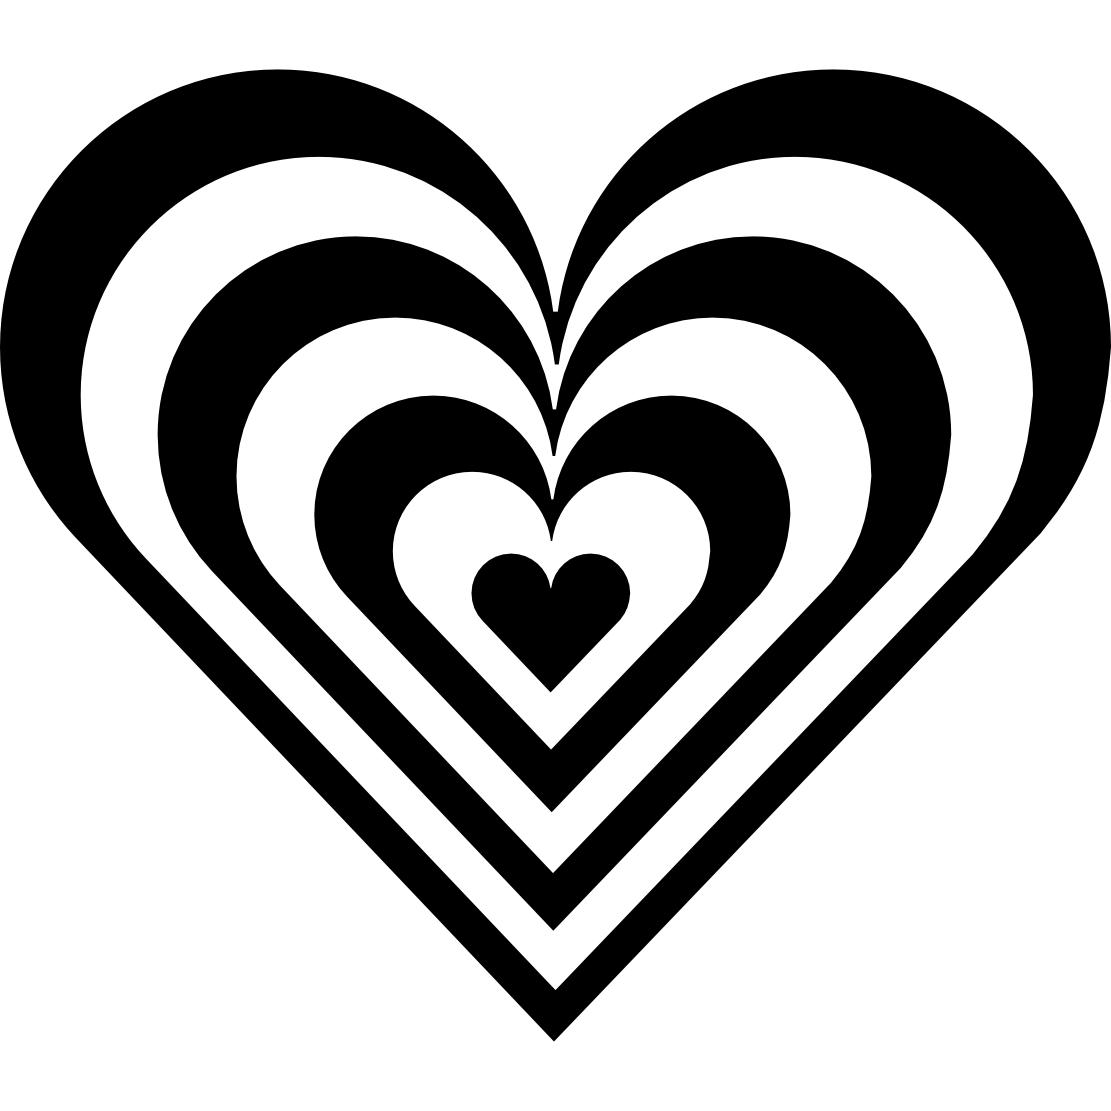 Heart  black and white clipart heart black and white free images 5